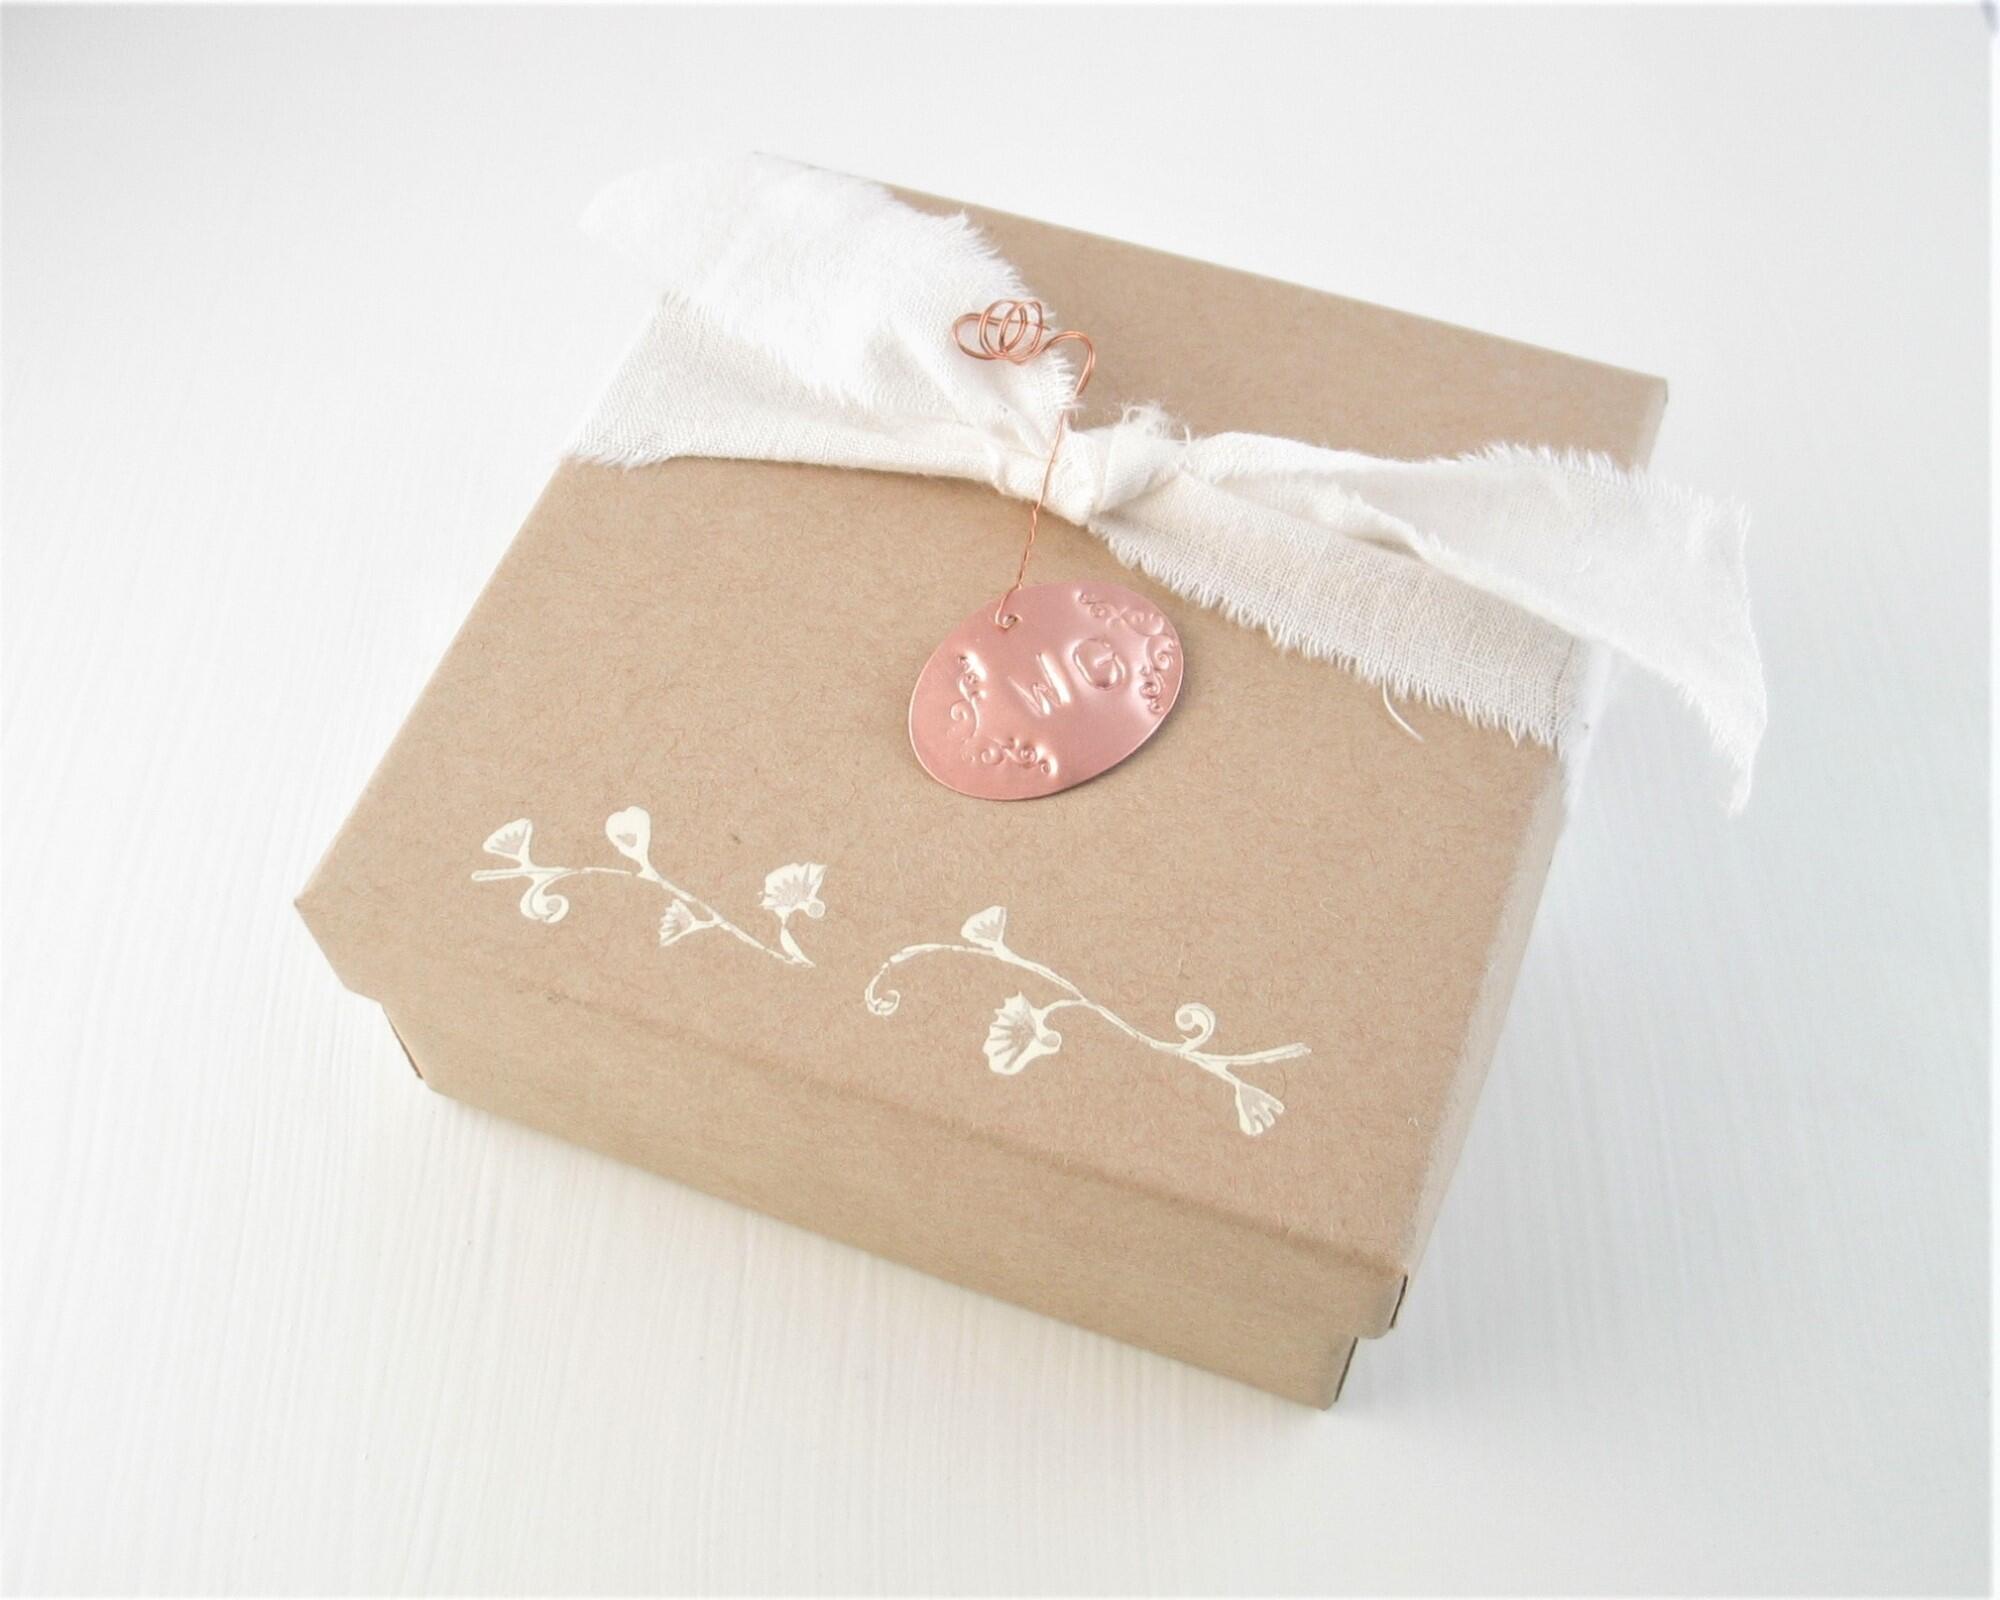 photo of gift box with muslin ribbon and copper charm with WG for wild gatherings